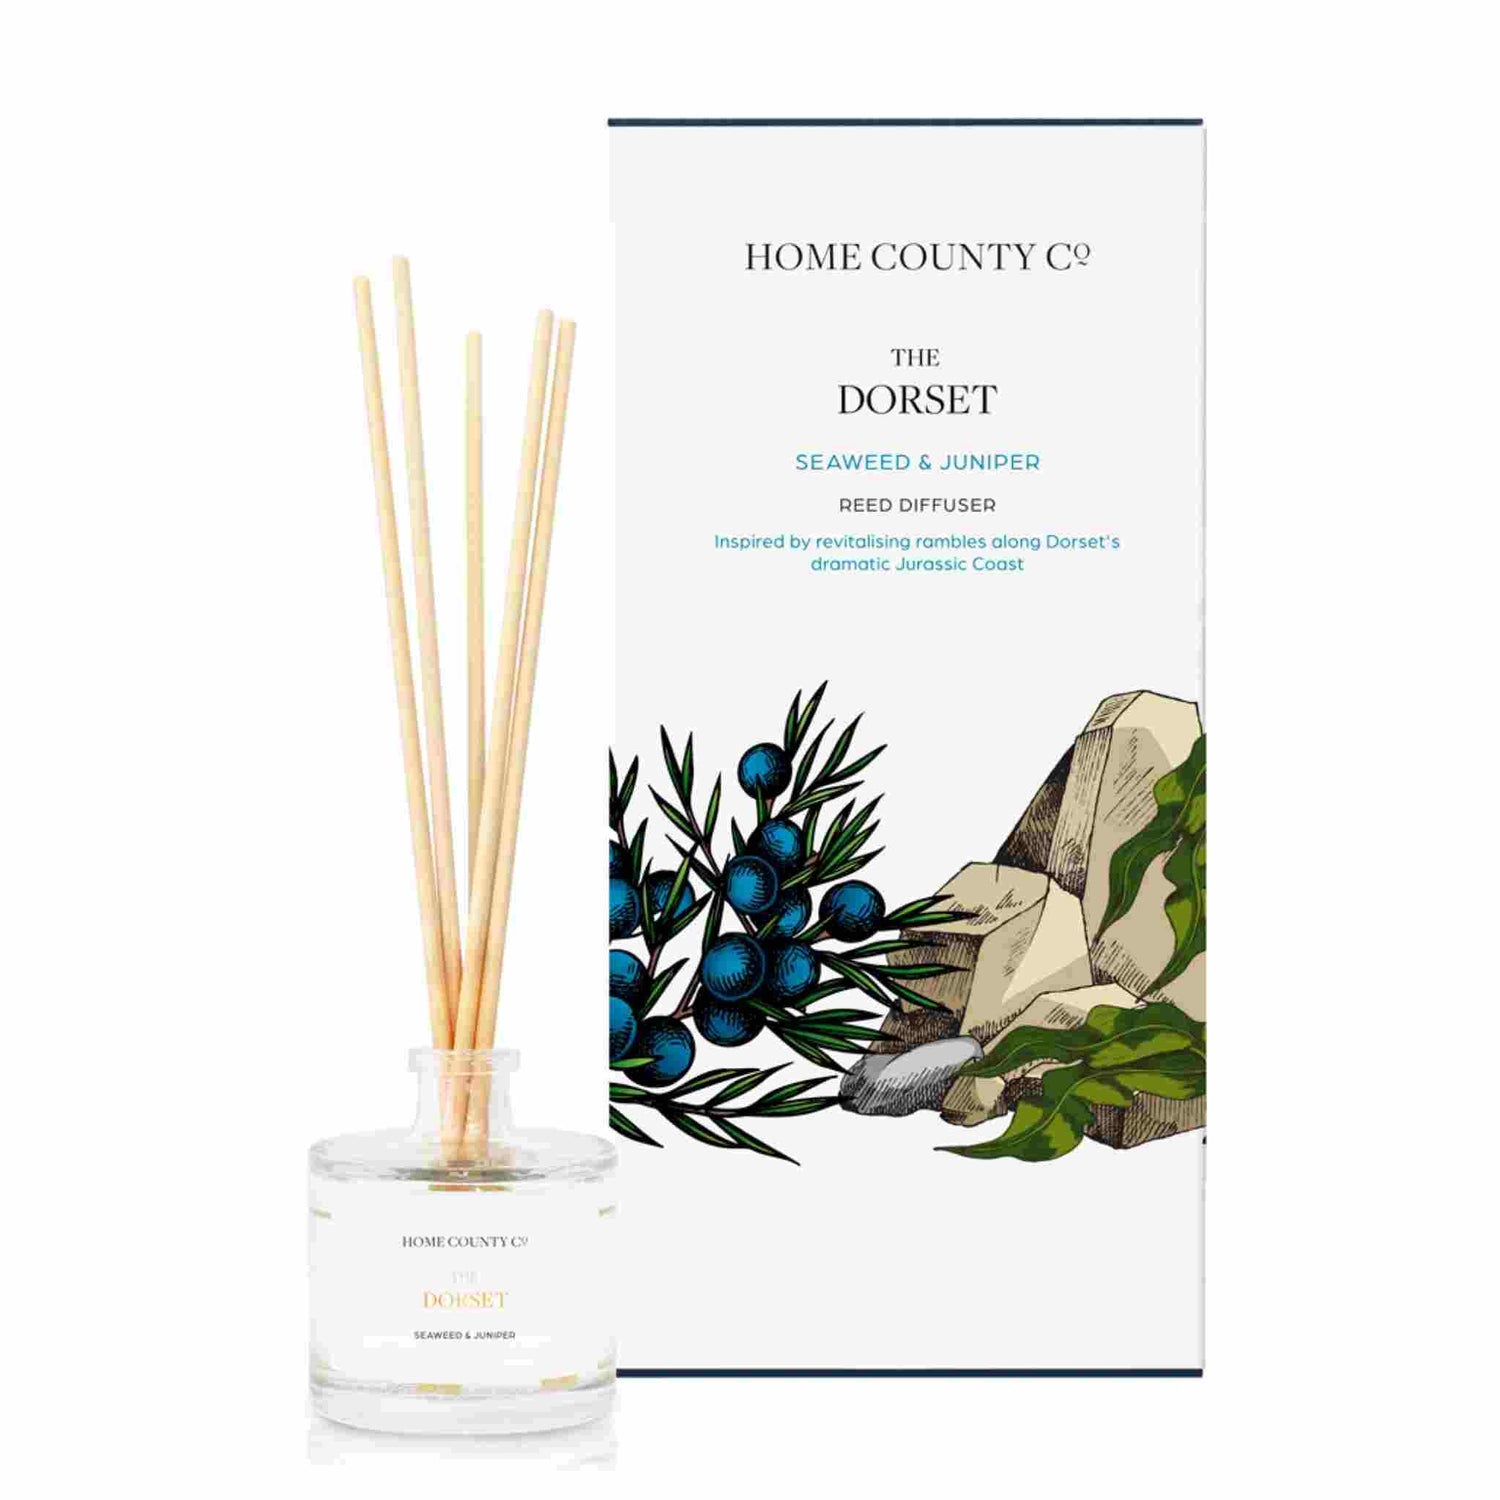 A seaweed and juniper scented reed diffuser from Home County Co. The vegan friendly reed diffuser is shown next to the eco friendly reed diffuser box packaging.